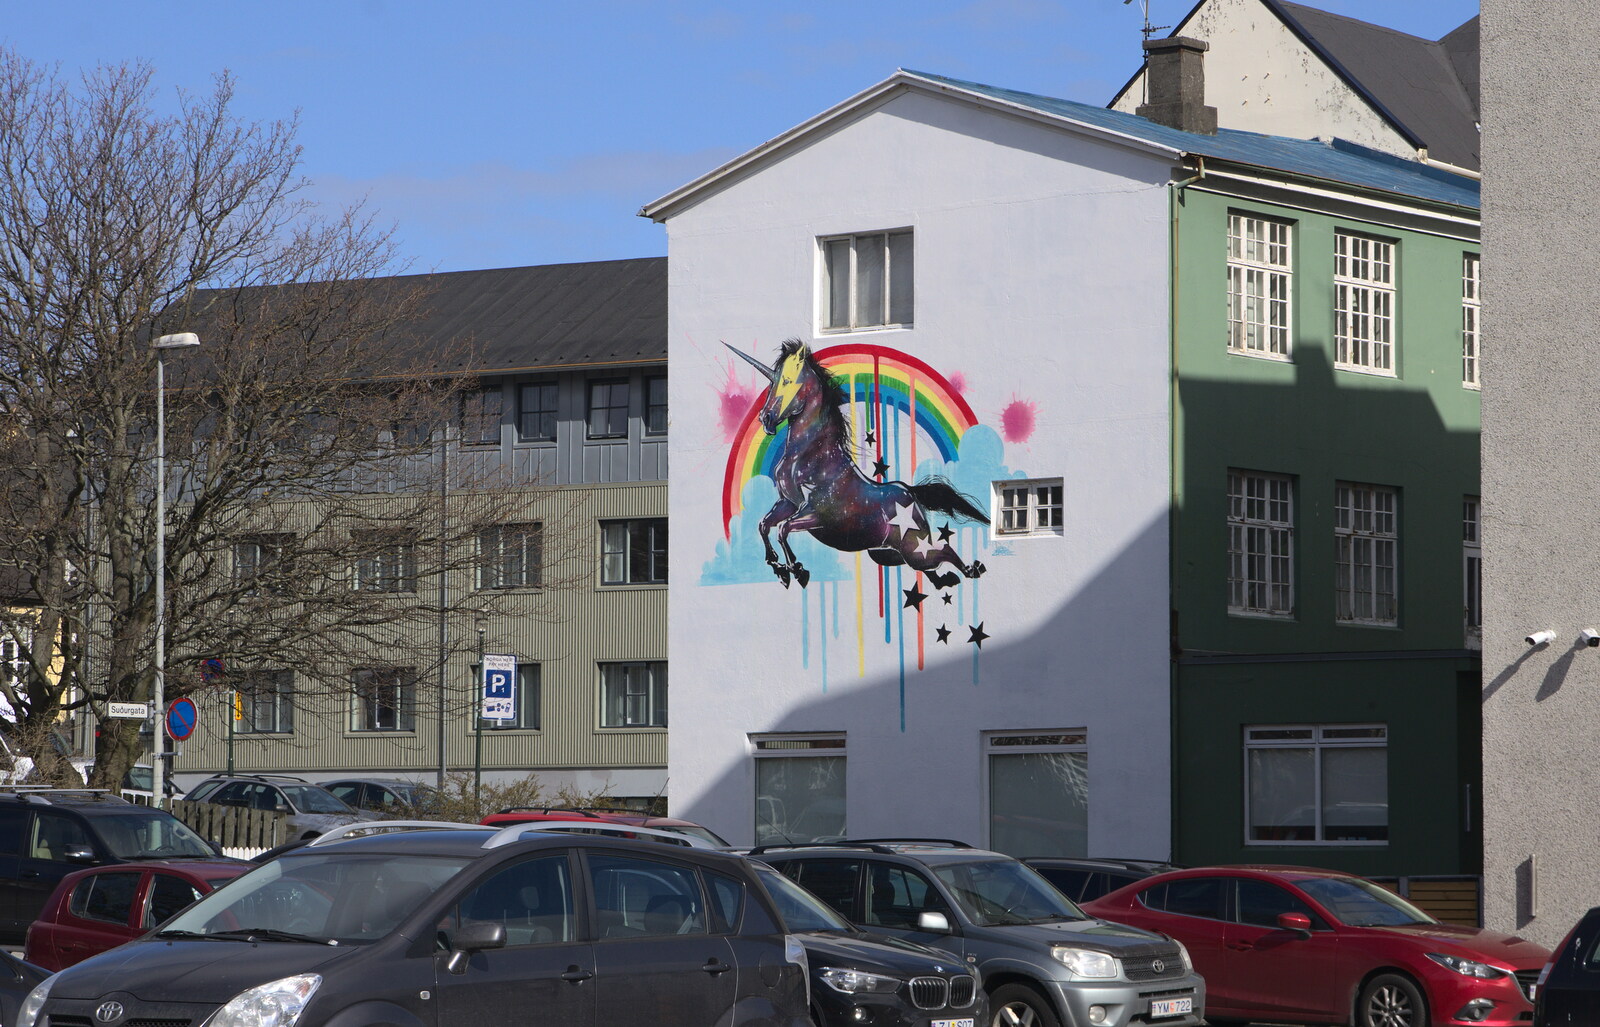 It's all rainbows and unicorns from Hallgrímskirkja Cathedral and Whale Watching, Reykjavik - 21st April 2017